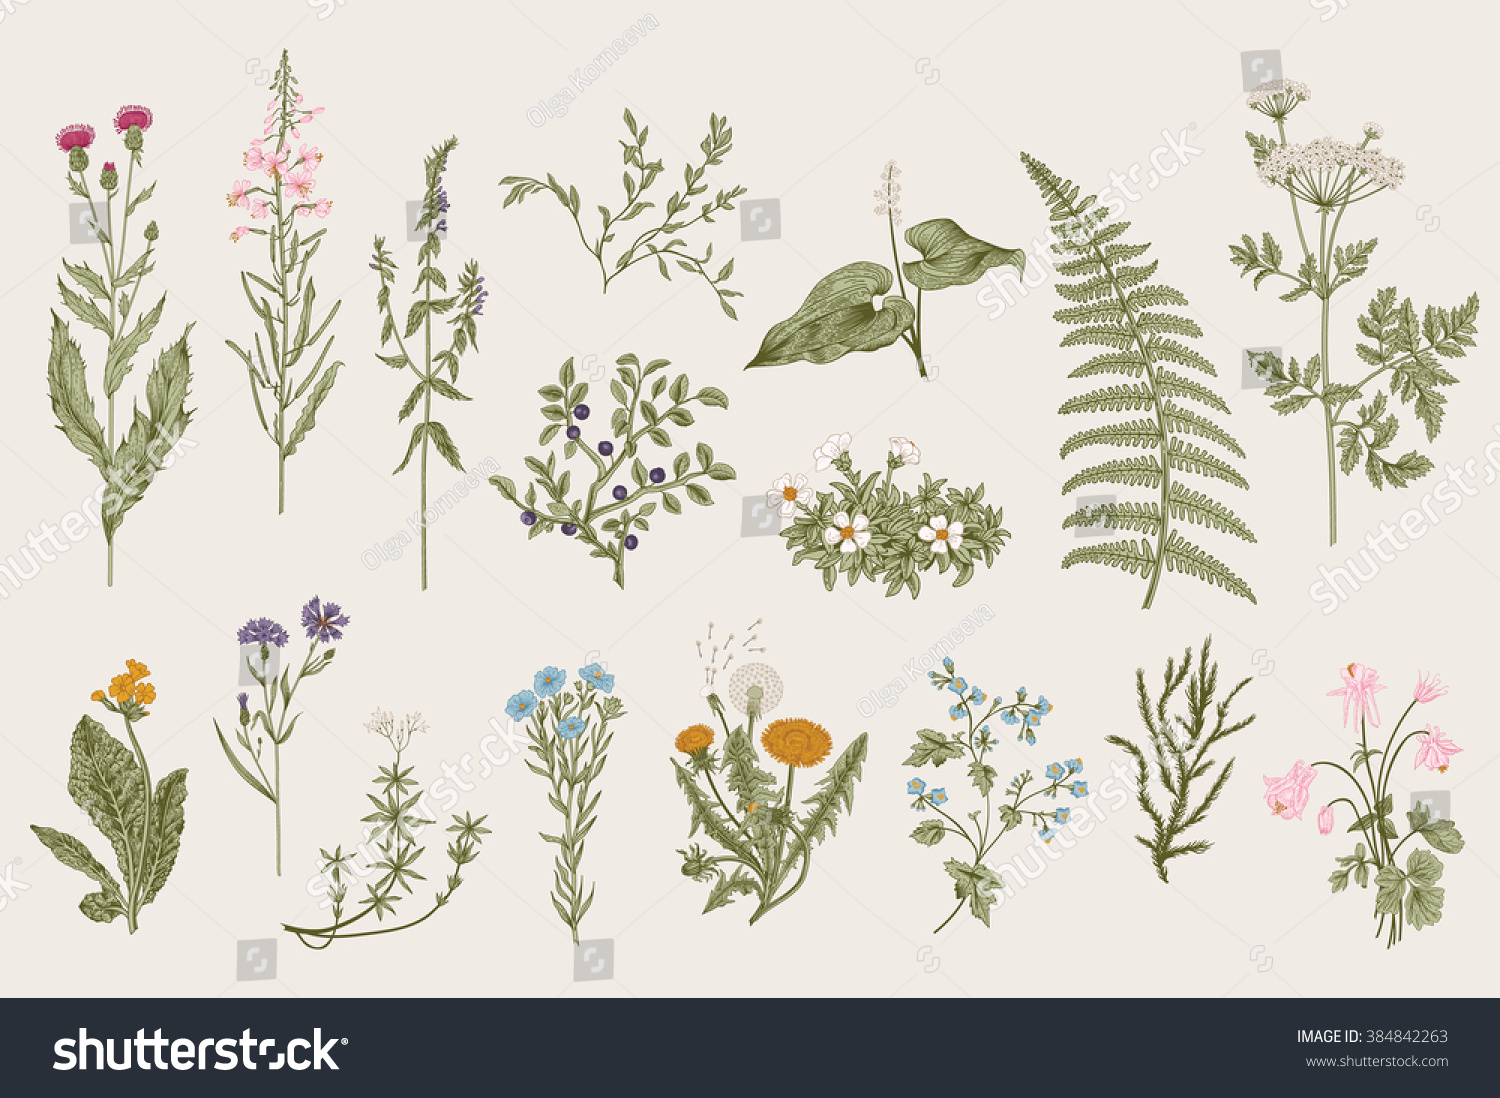 Herbs and Wild Flowers. Botany. Set. Vintage flowers. Colorful illustration in the style of engravings. #384842263